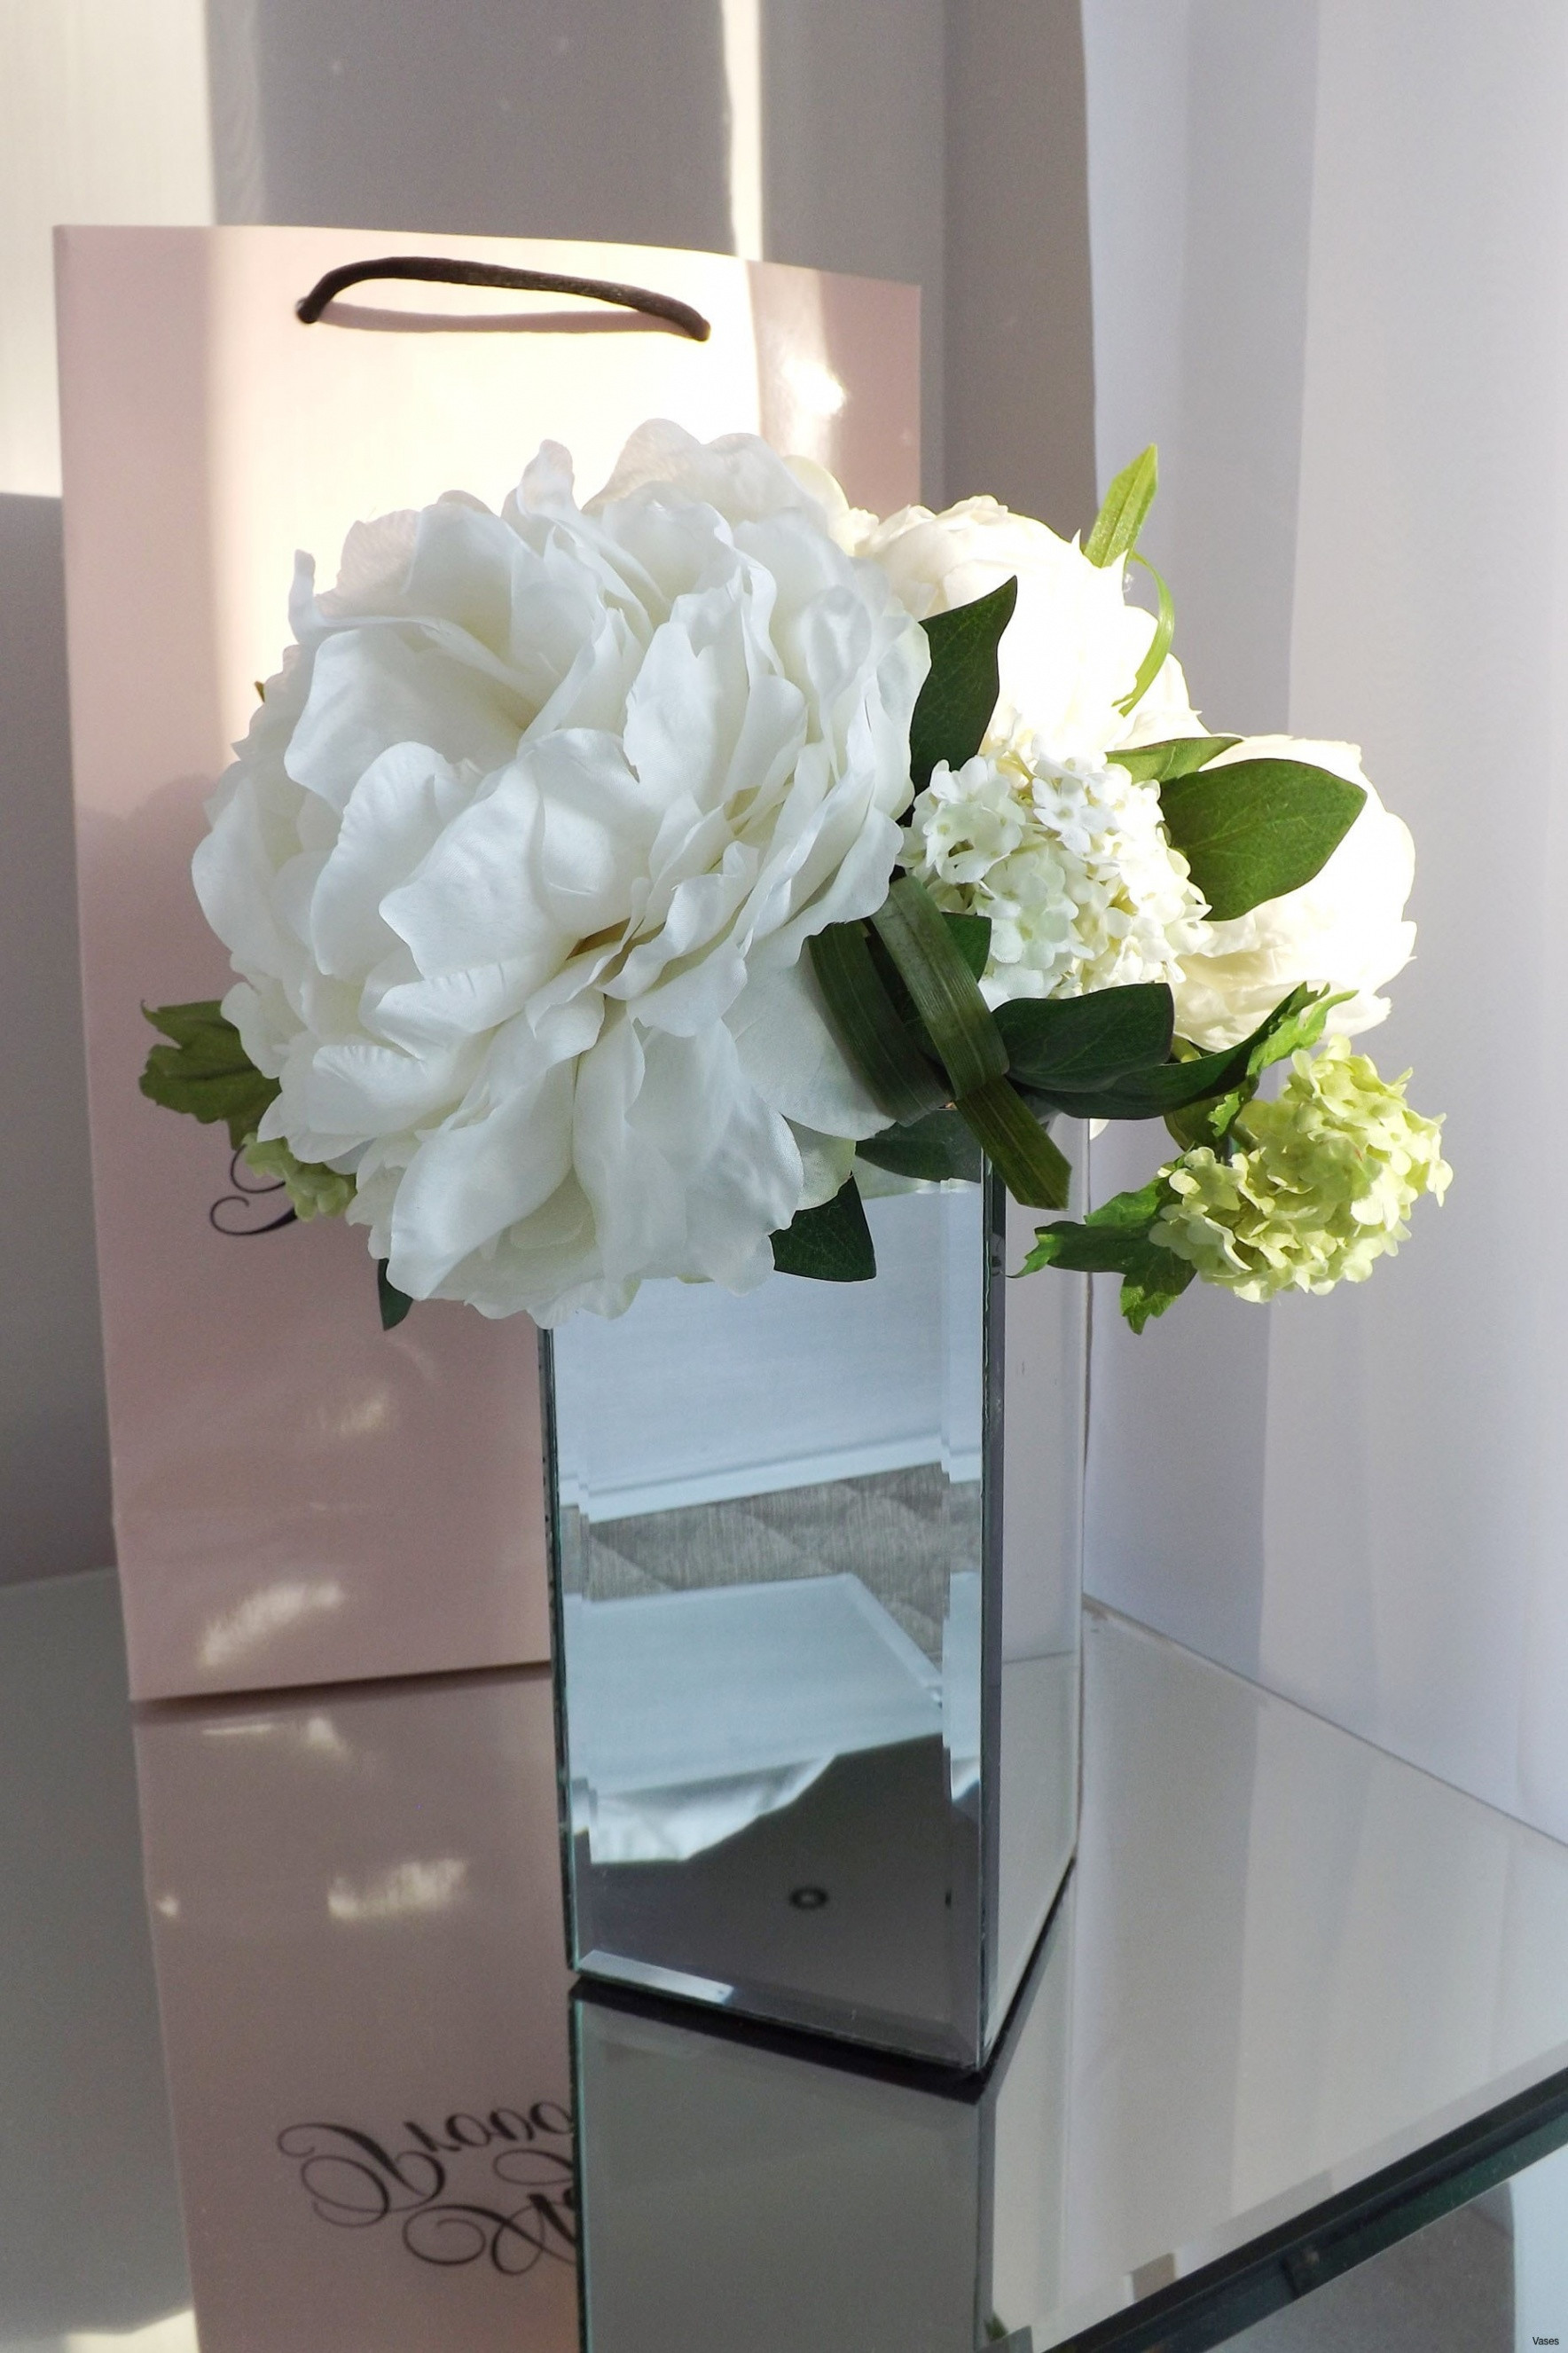 19 Fabulous Tall White Glass Vase 2024 free download tall white glass vase of h vases for flower arrangements i 0d dry inspiration picture design inside image de metal vases 3h mirrored mosaic vase votivei 0d hobby lobby canada to